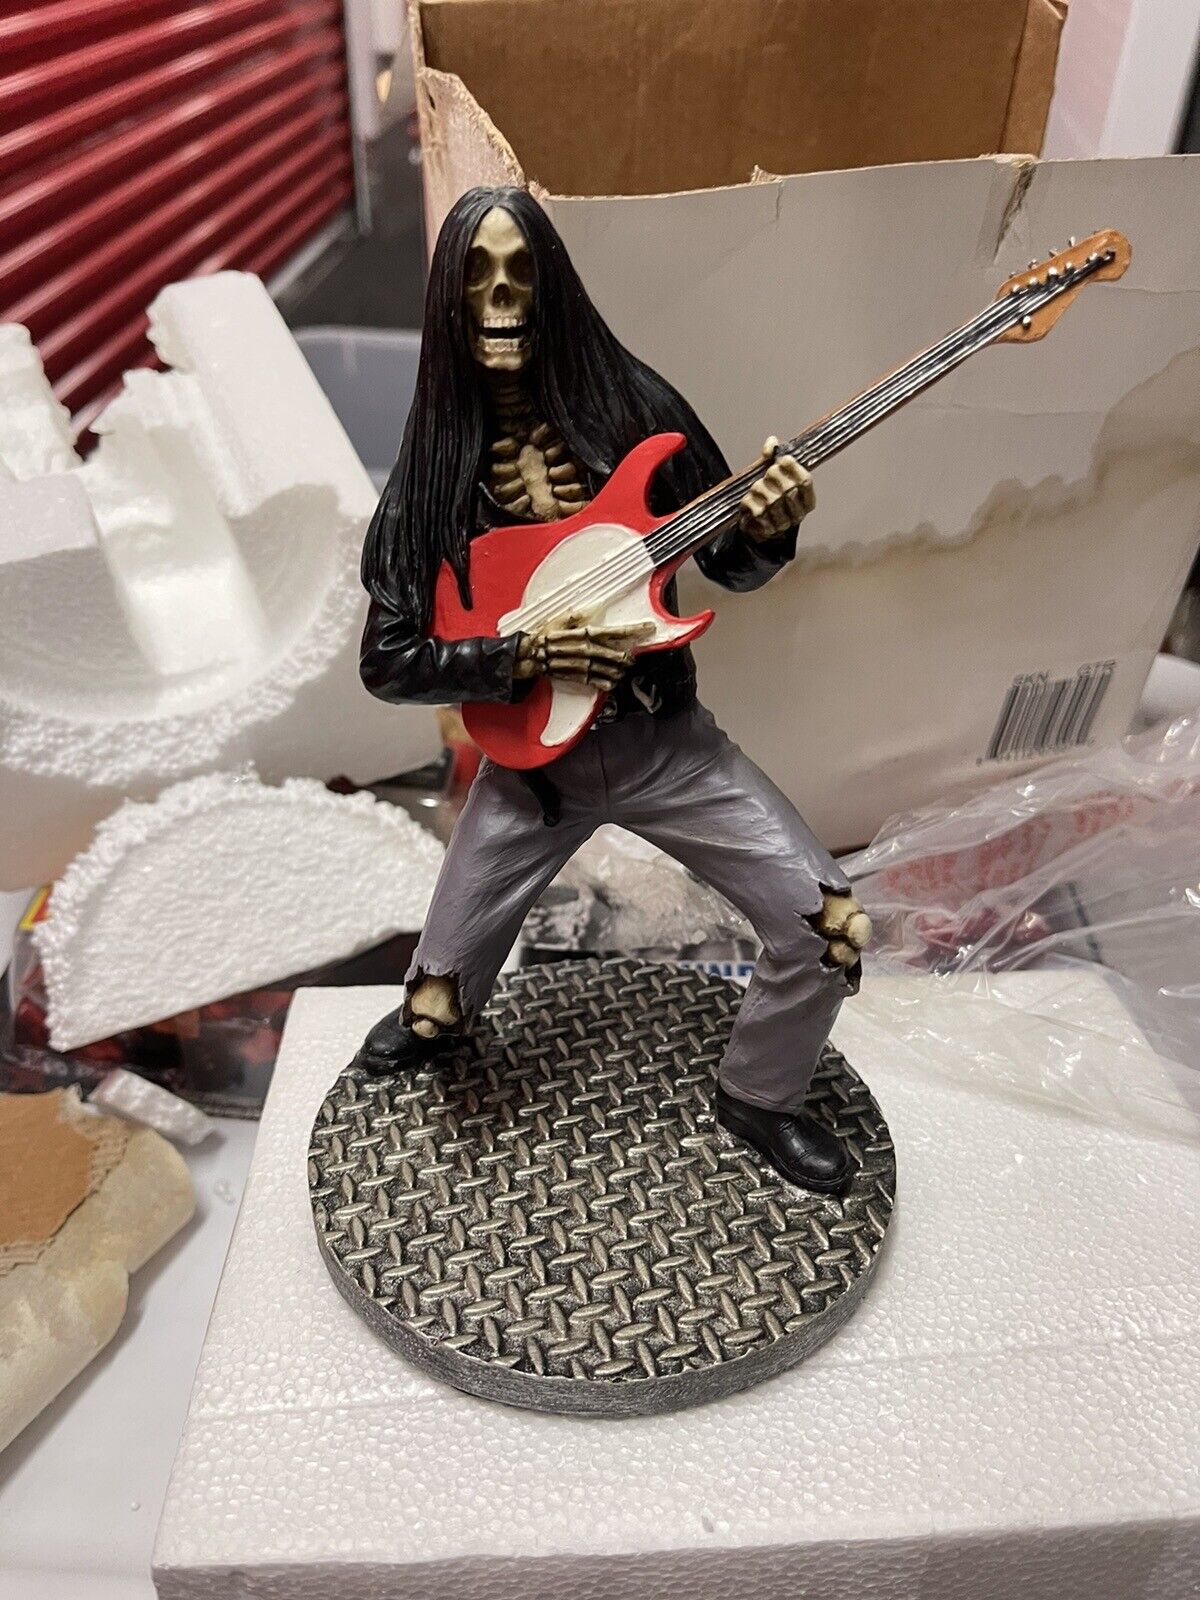 Ebros Day Of The Dead Skeleton Hell Rock Band Electric Guitarist Figurine